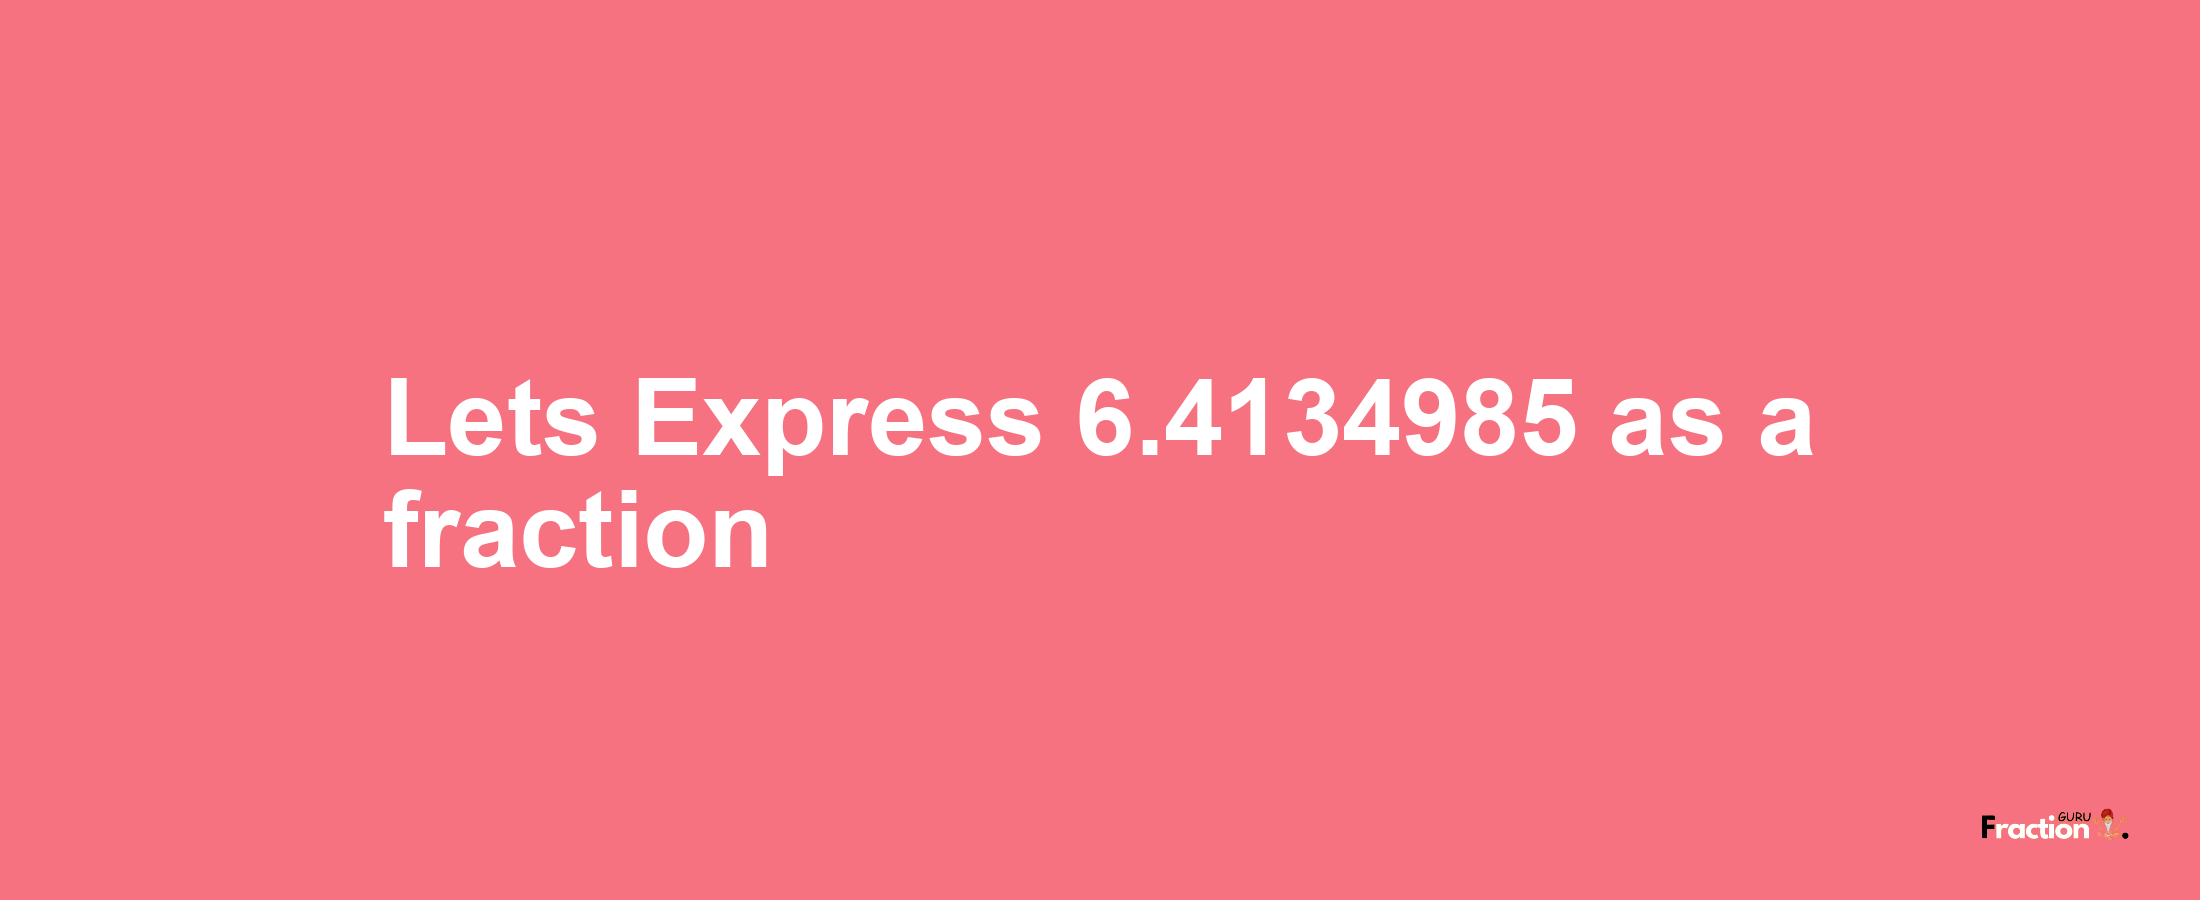 Lets Express 6.4134985 as afraction